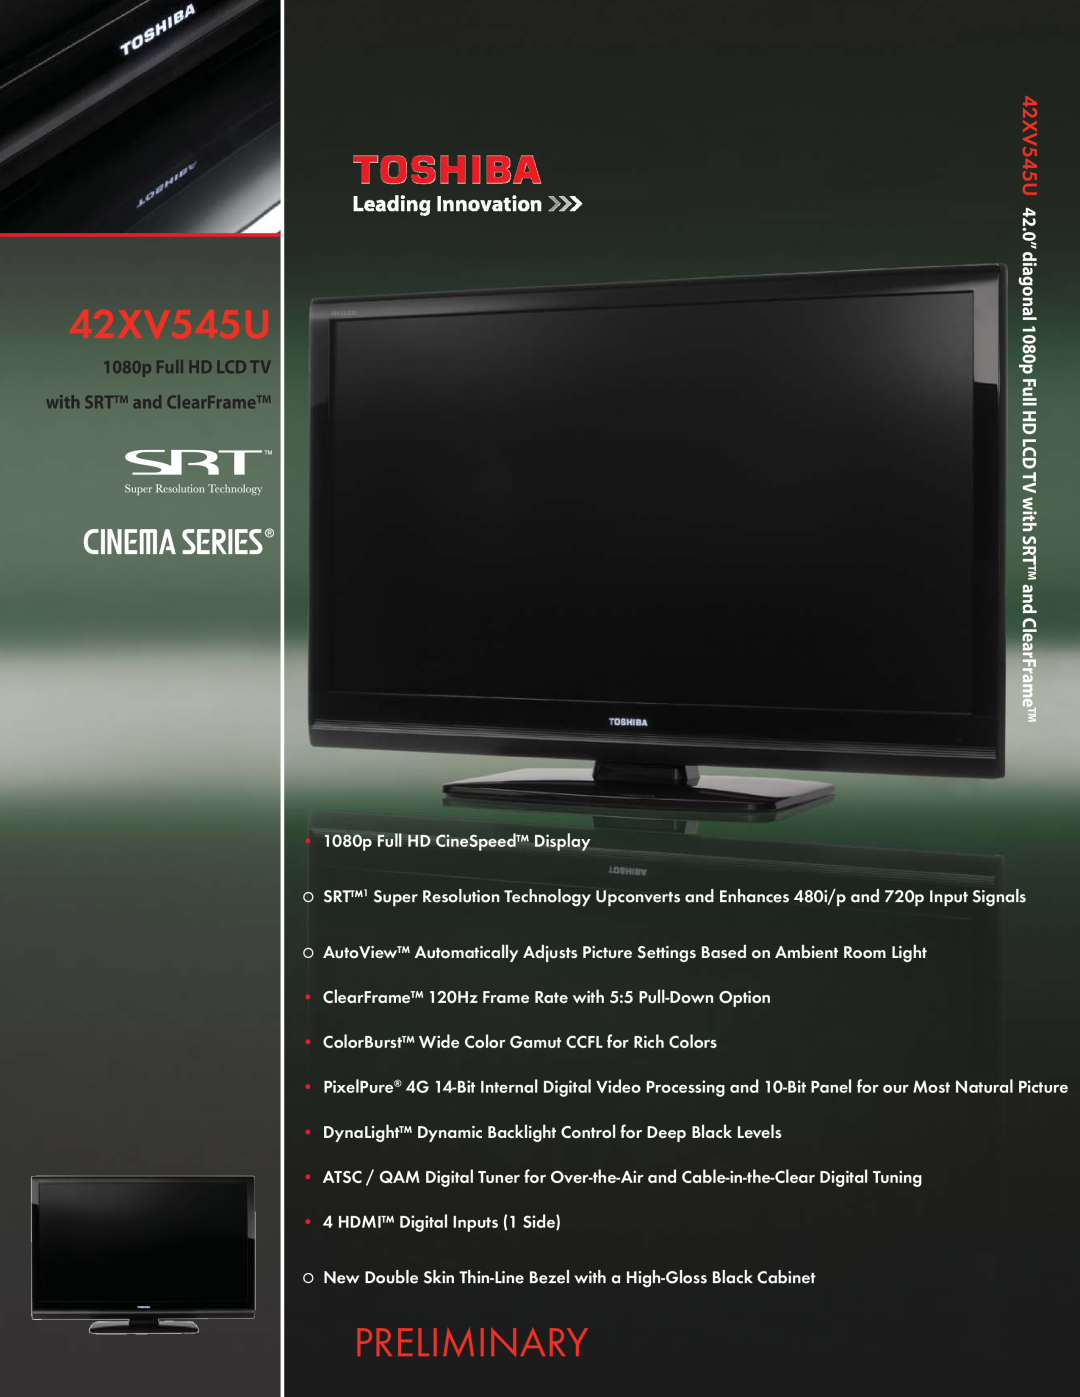 Toshiba 42XV545U manual Preliminary, 1080p Full HD LCD TV, with SRT and ClearFrame 